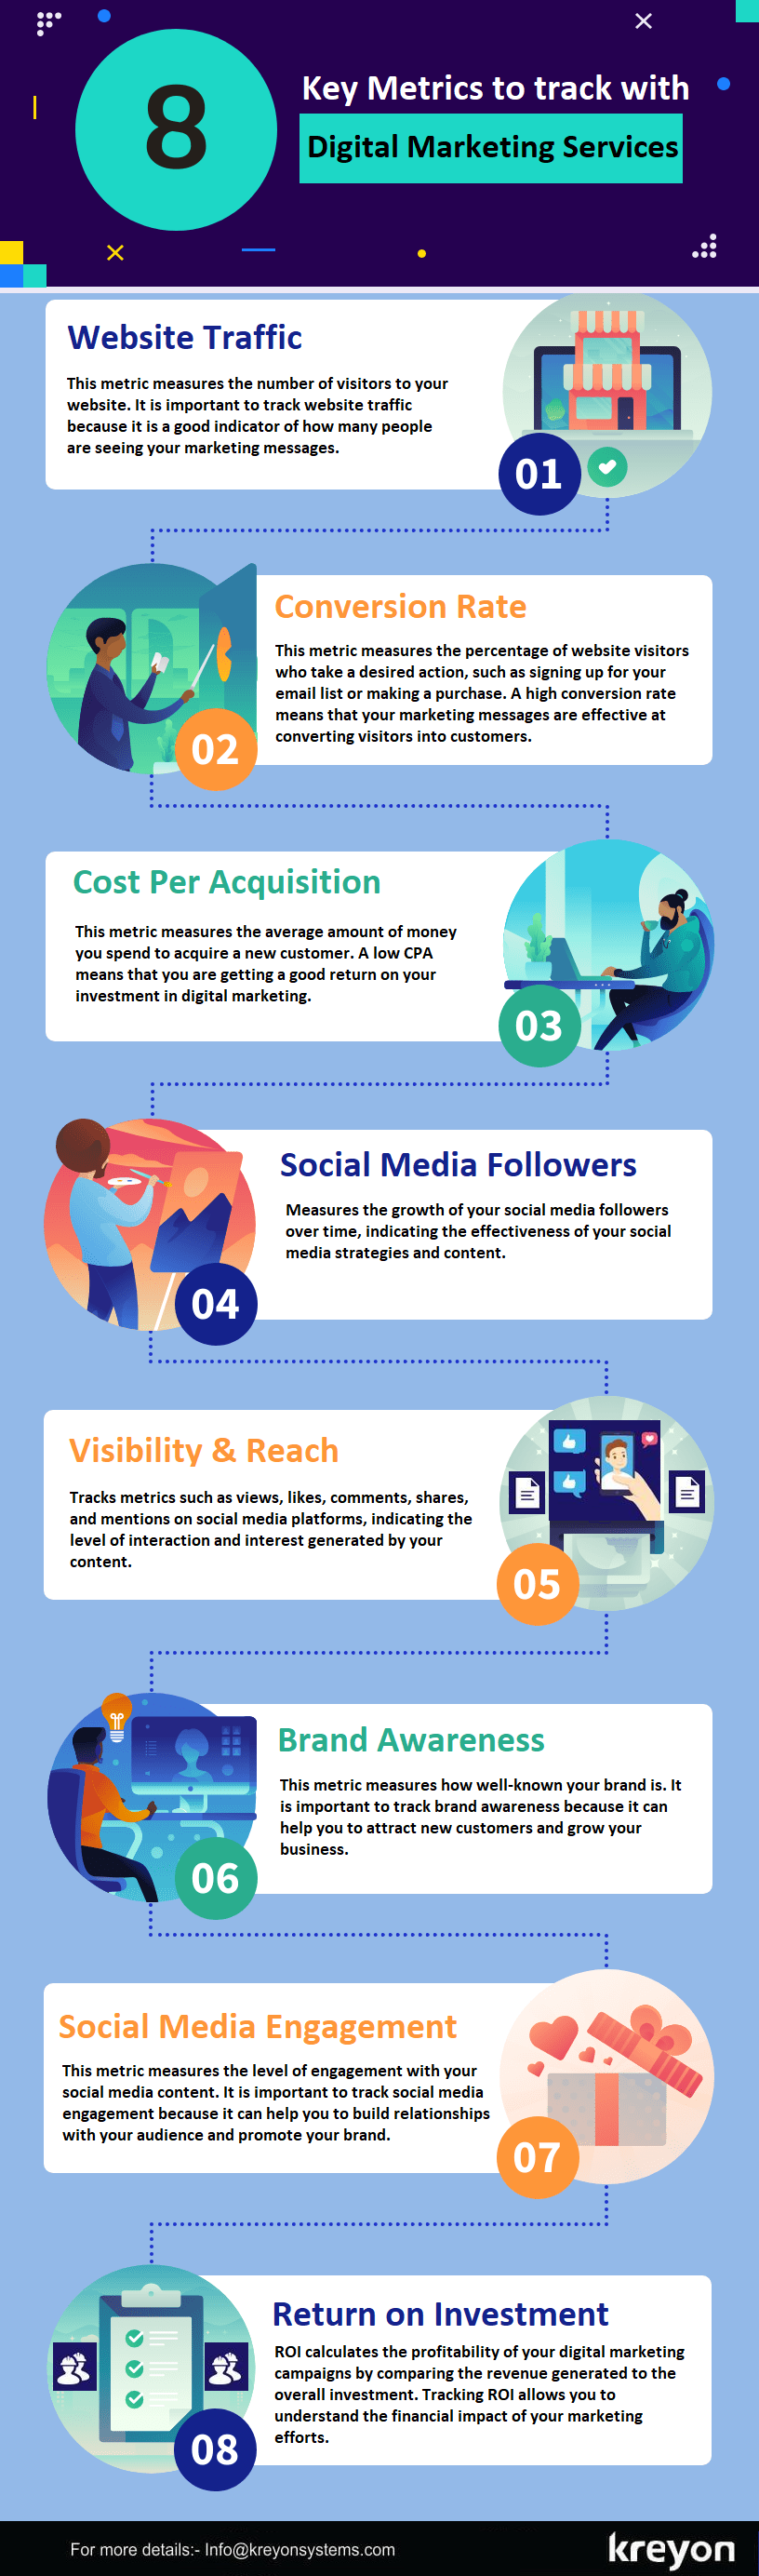 Digital Marketing Services Infographic